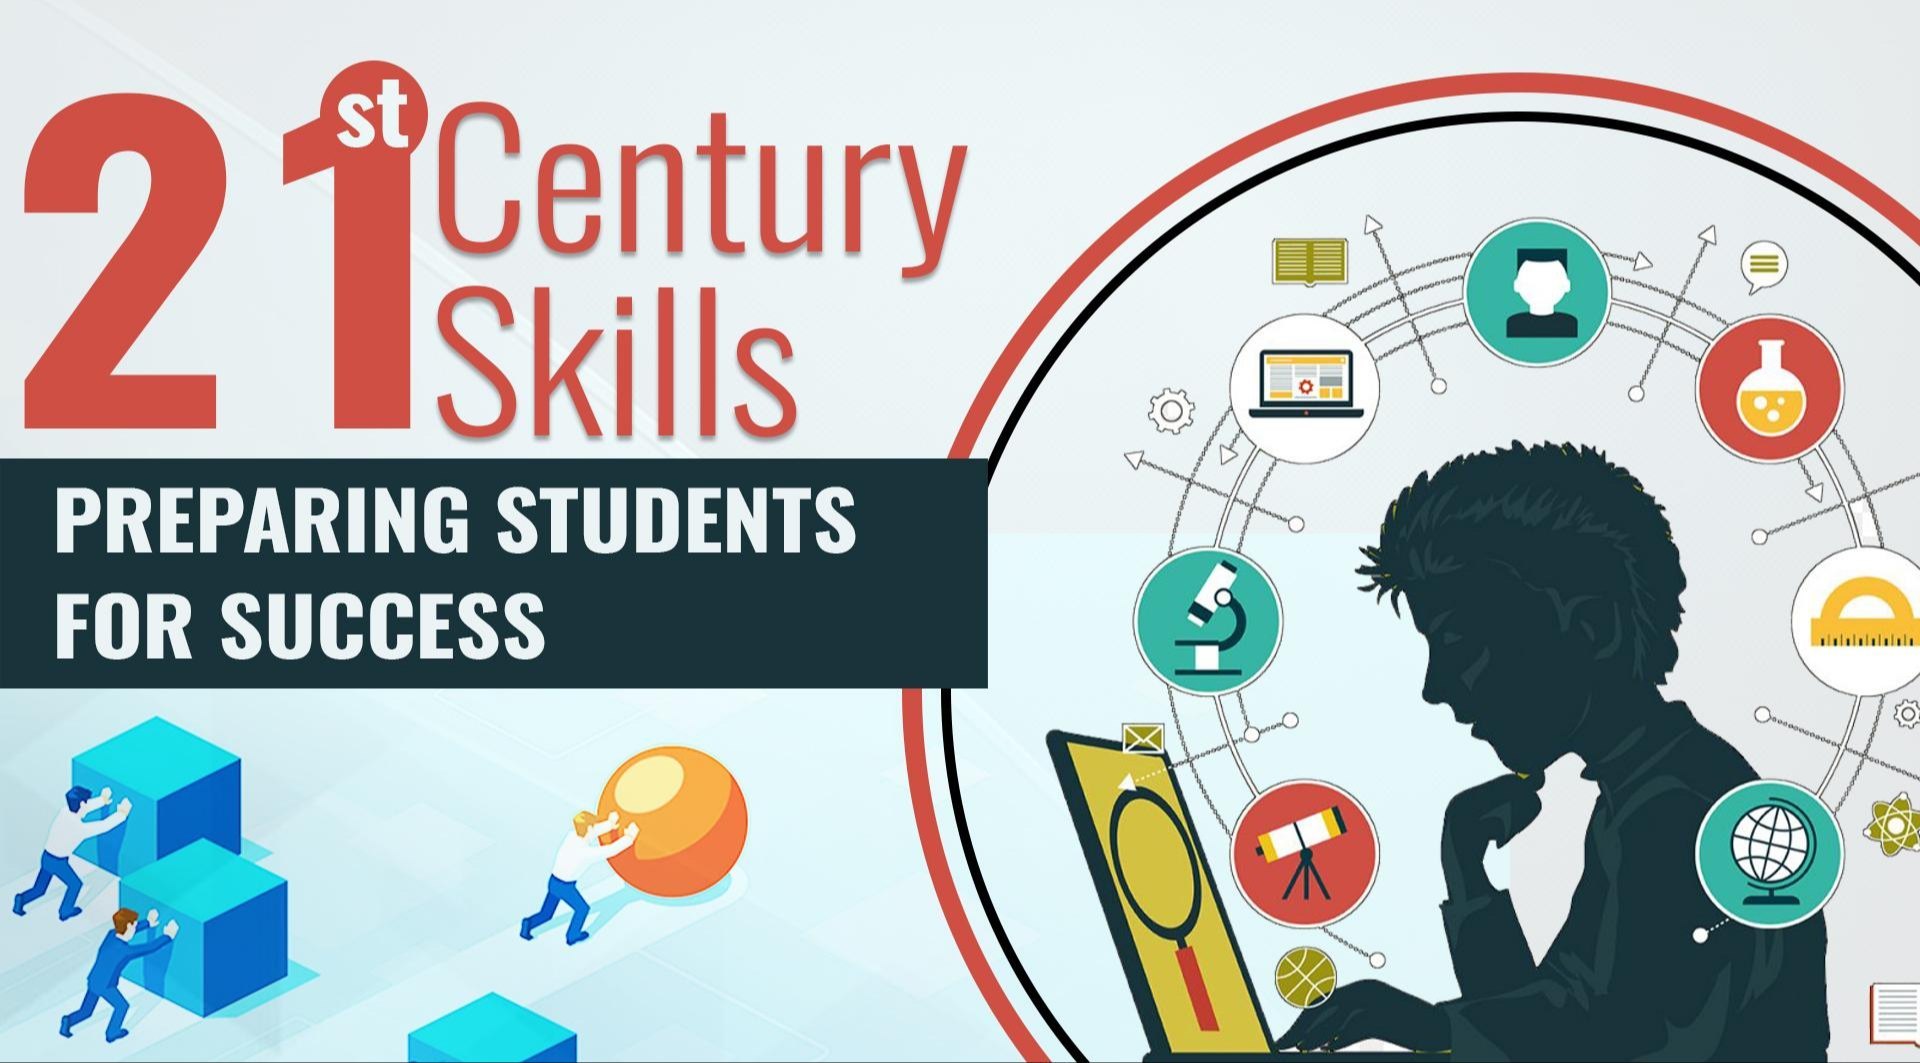 Top Skills for the 21st Century